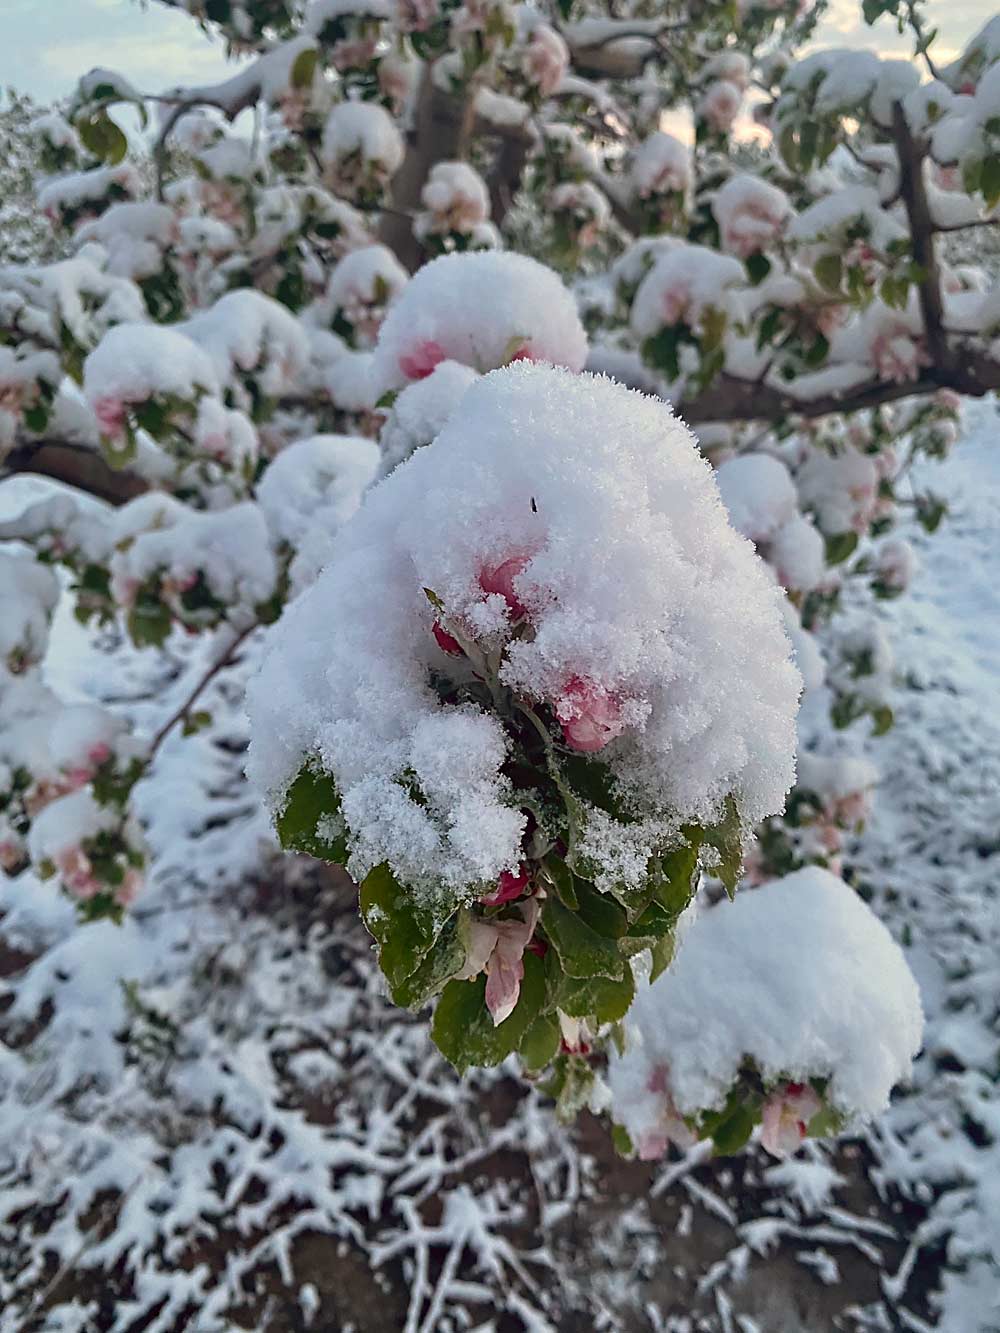 Snow on apple blossoms at Beasley’s Orchard in Danville, Indiana, on April 21. Freezing temperatures April 20–22 killed an estimated 90 percent of the orchard’s fruit. (Courtesy Calvin Beasley/Beasley’s Orchard)